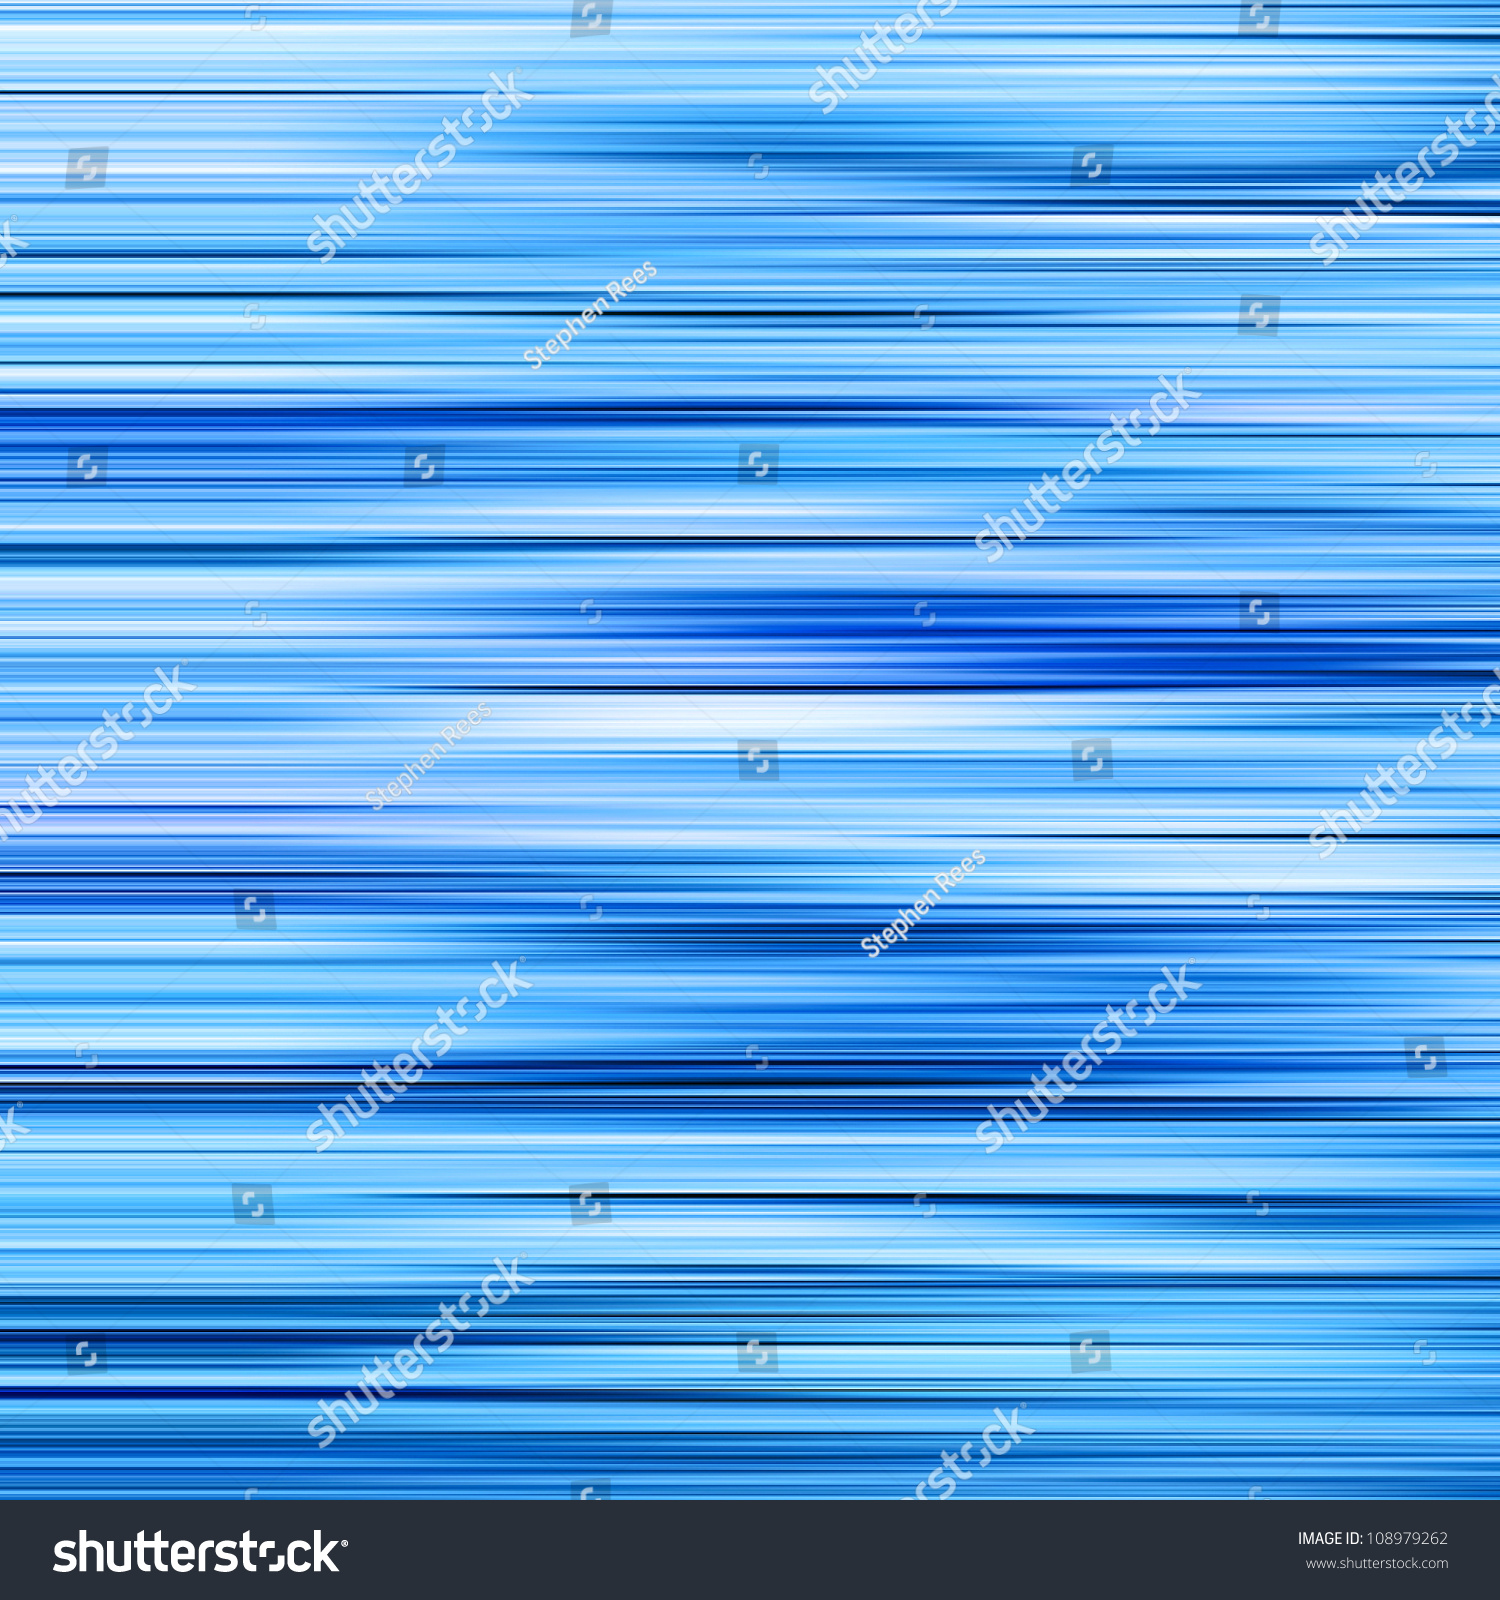 Bright Blue Horizontal Stripes Abstract Background Stock Photo ...